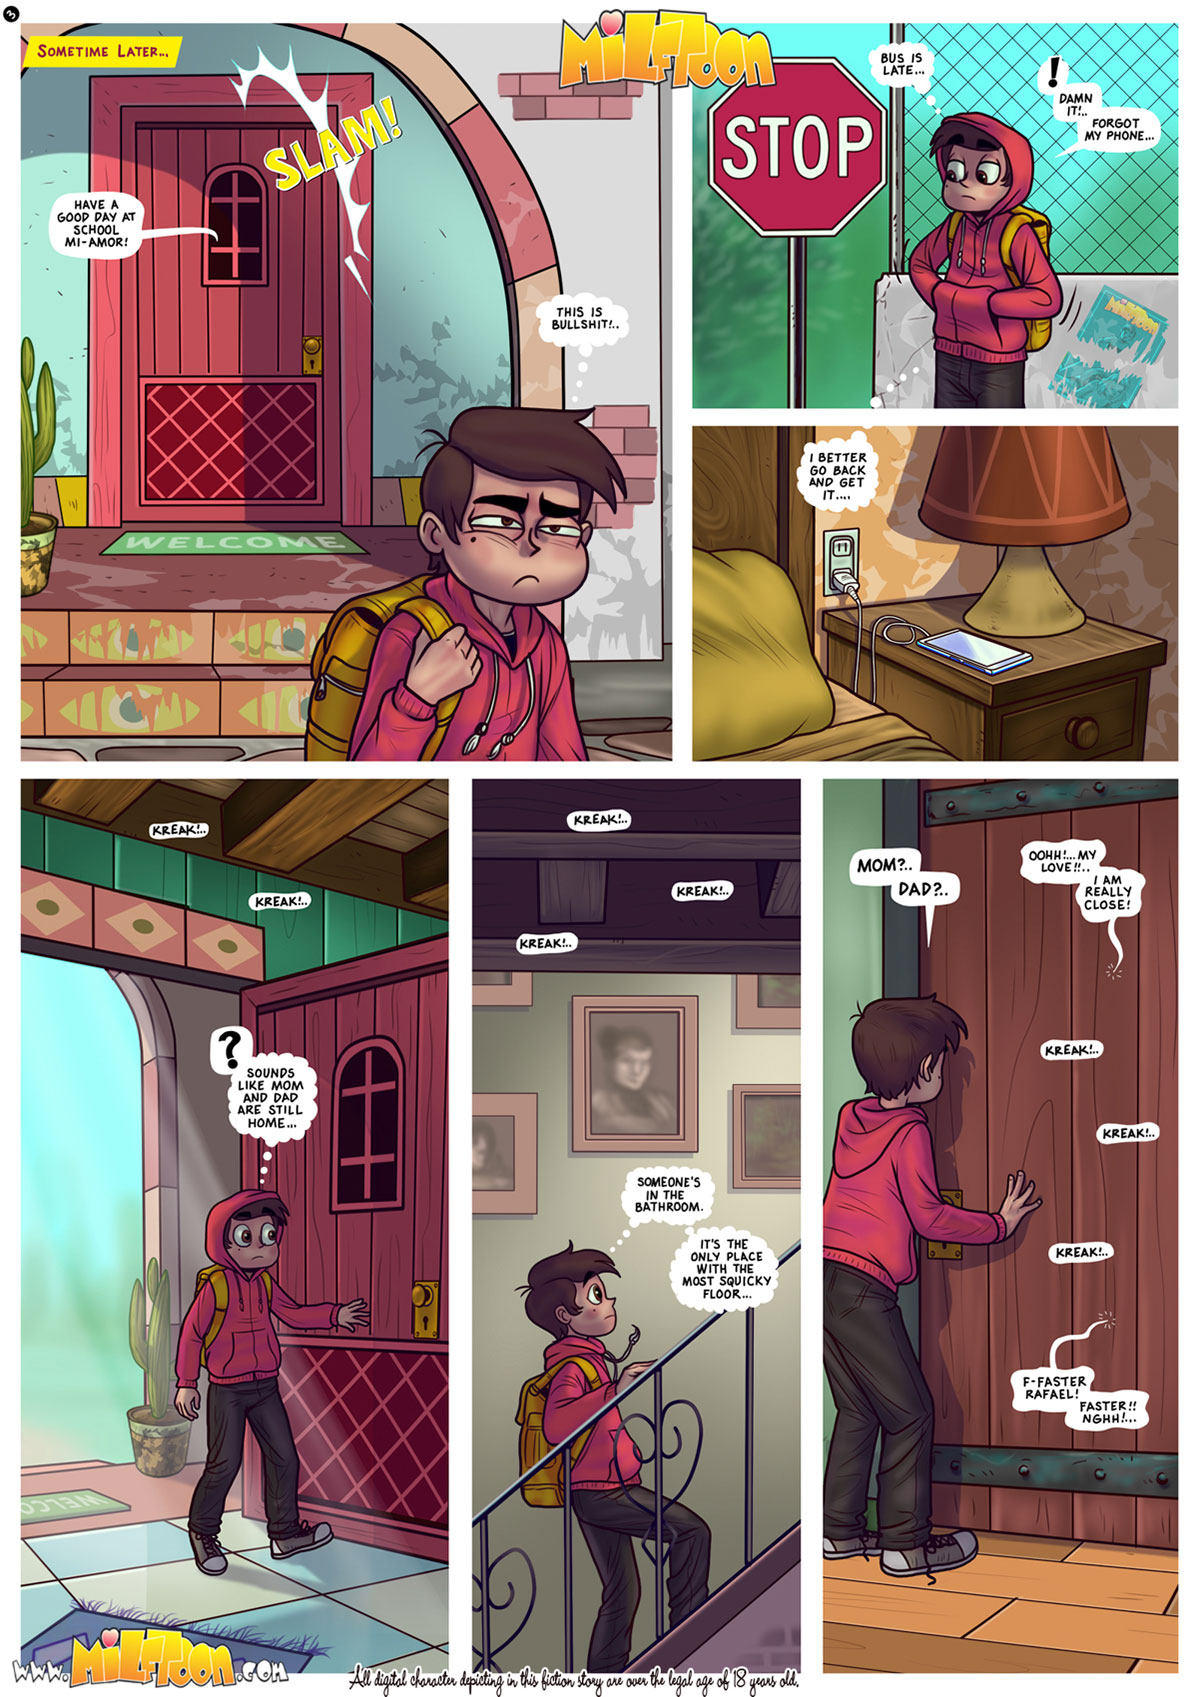 Milftoon comic "Marco vs The Forces of Milf" - page 3